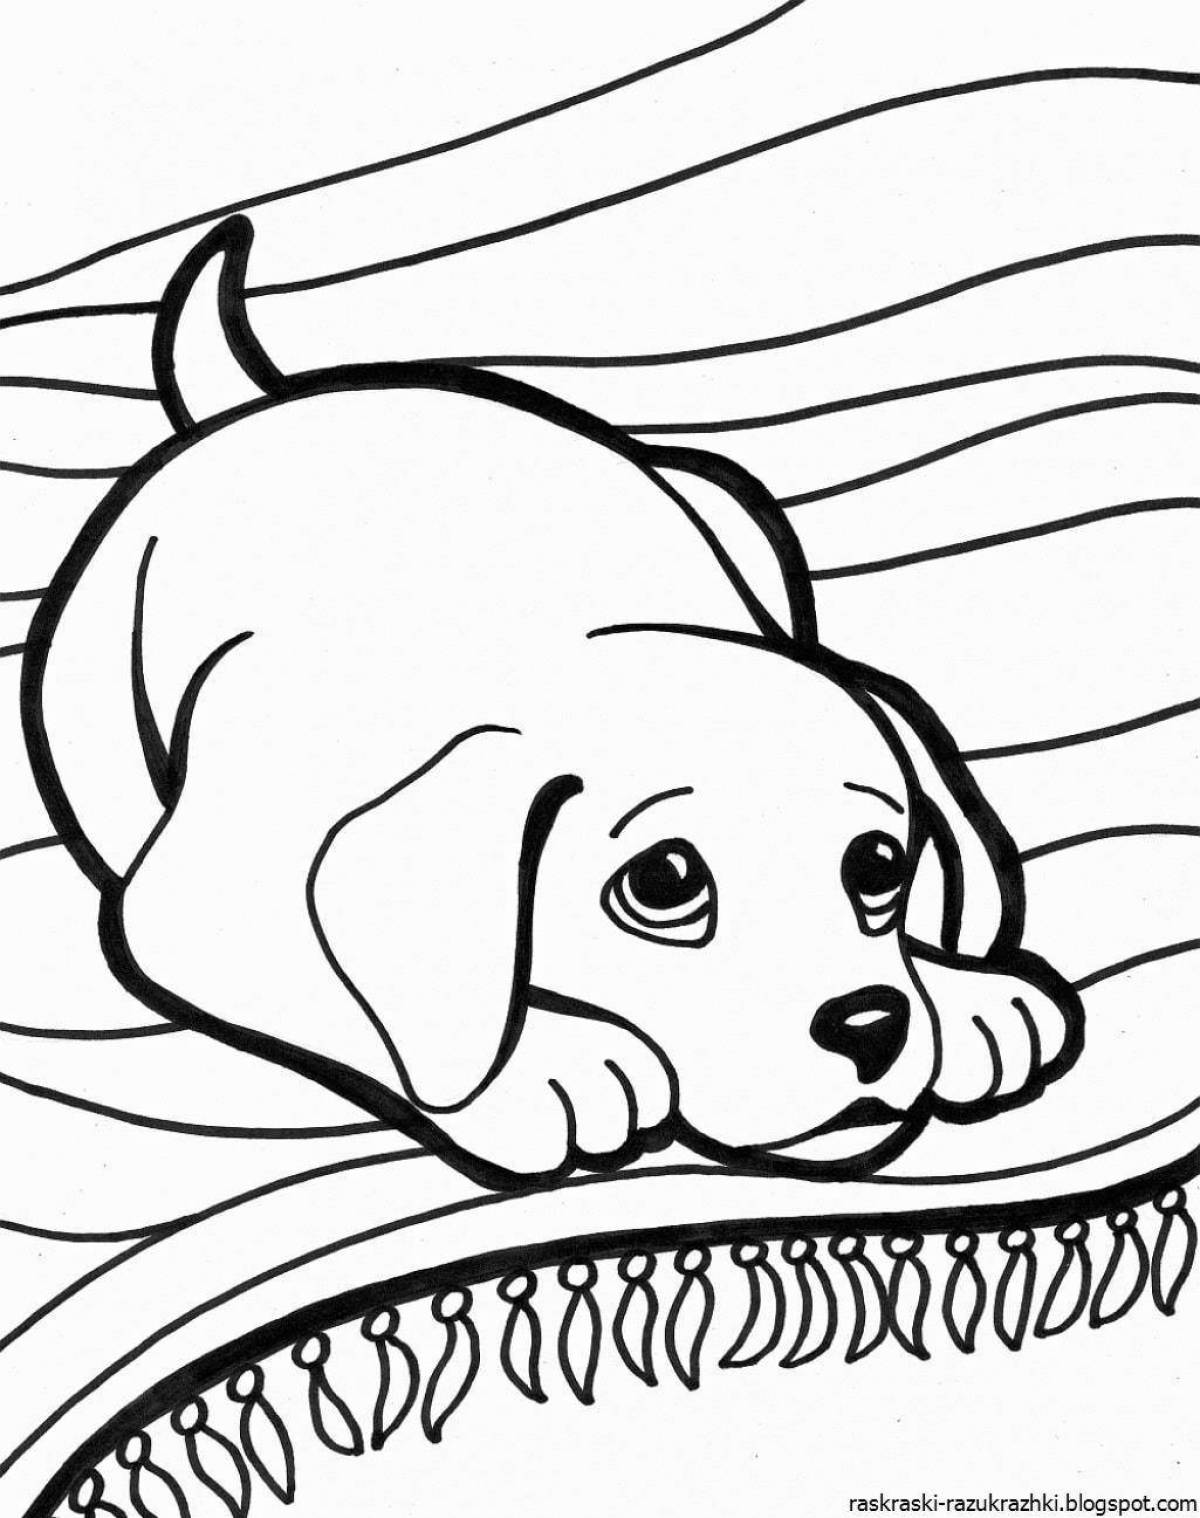 Great dog coloring book for 5-6 year olds